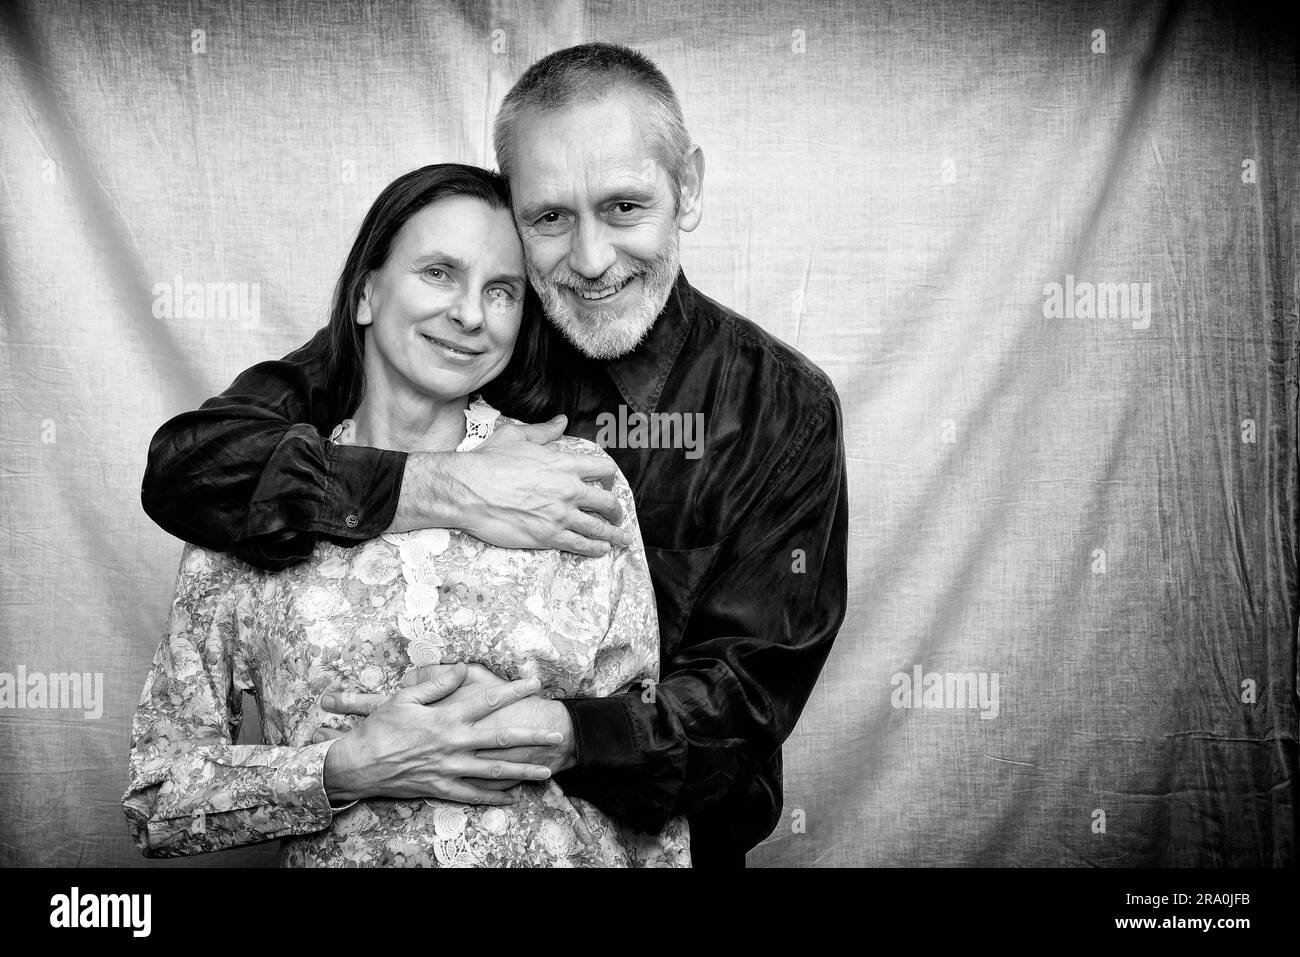 Happy mature man and woman smiling for S. Valentine's day or anniversary and embracing each other. Black and white photo Stock Photo